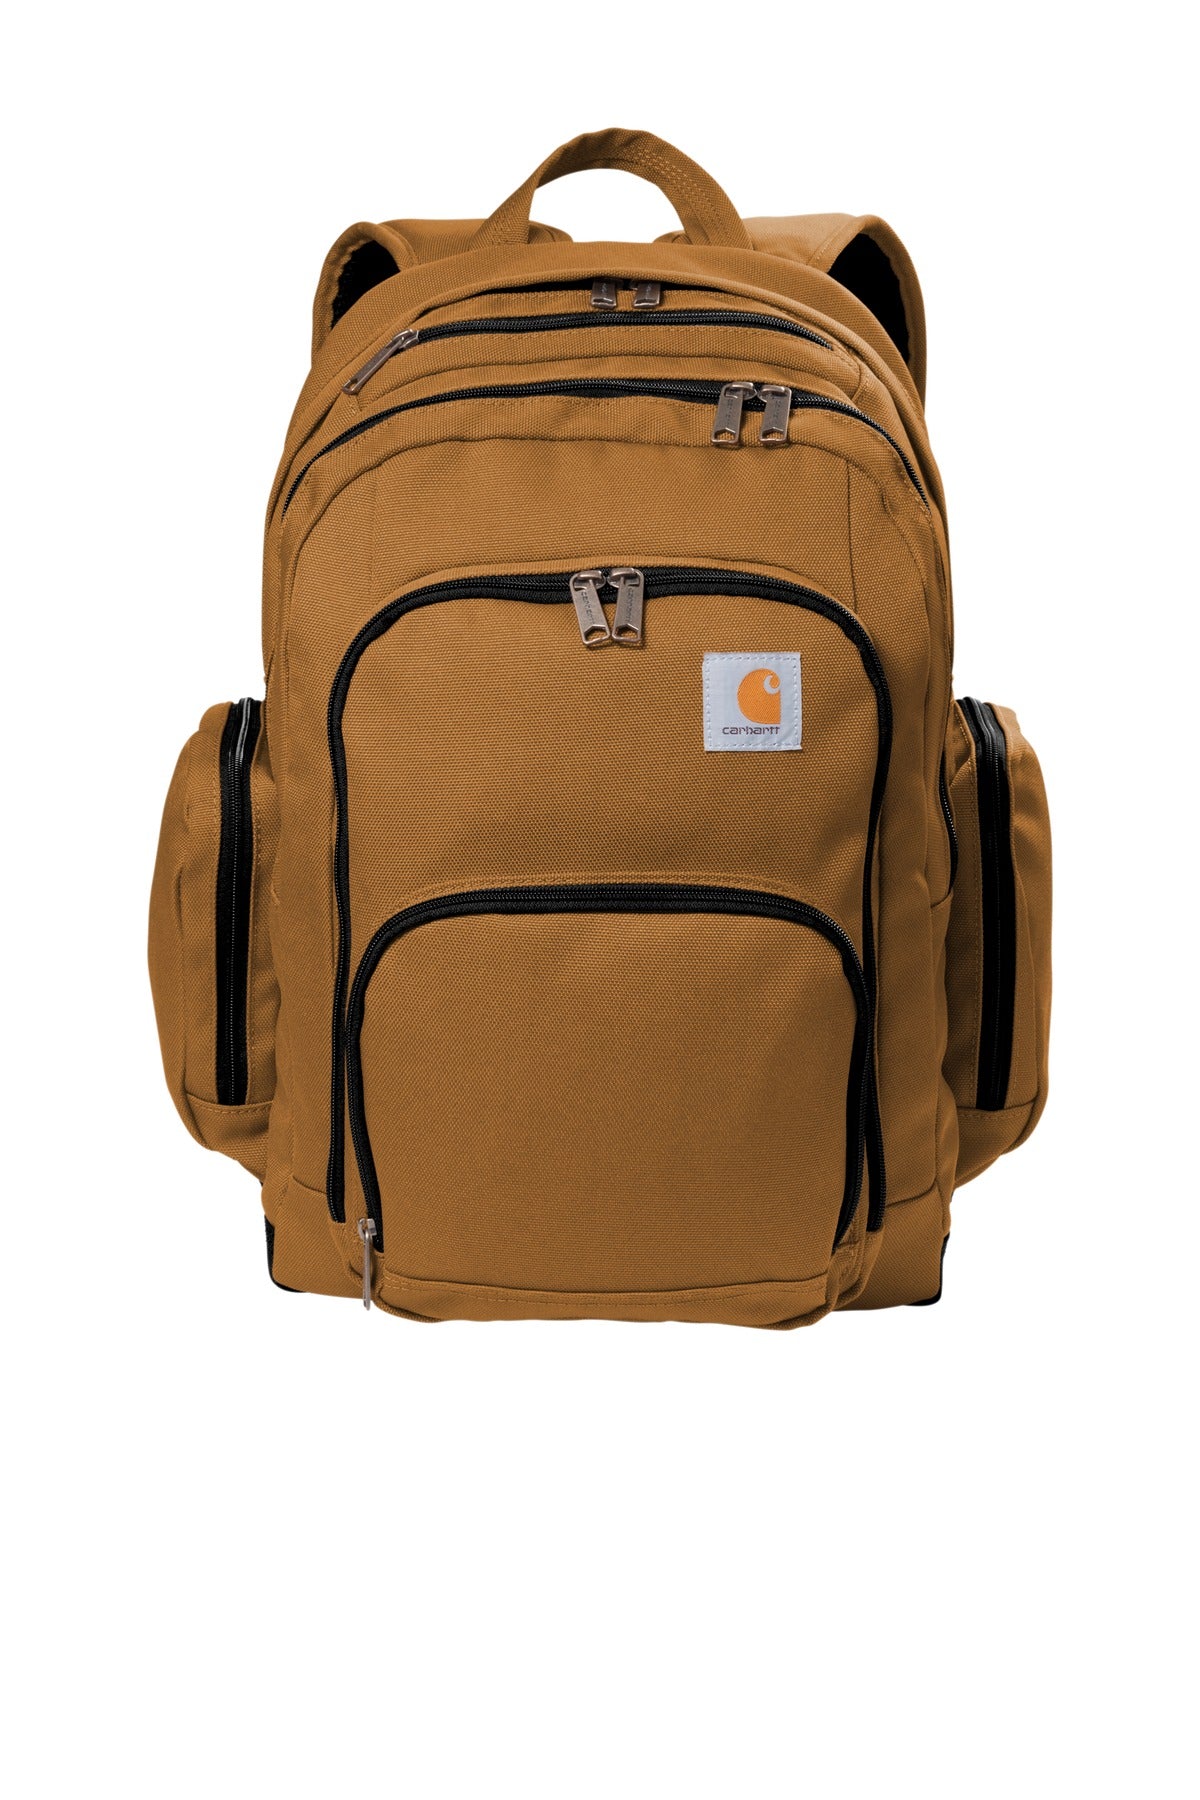 Carhartt ® Foundry Series Pro Backpack. CT89176508